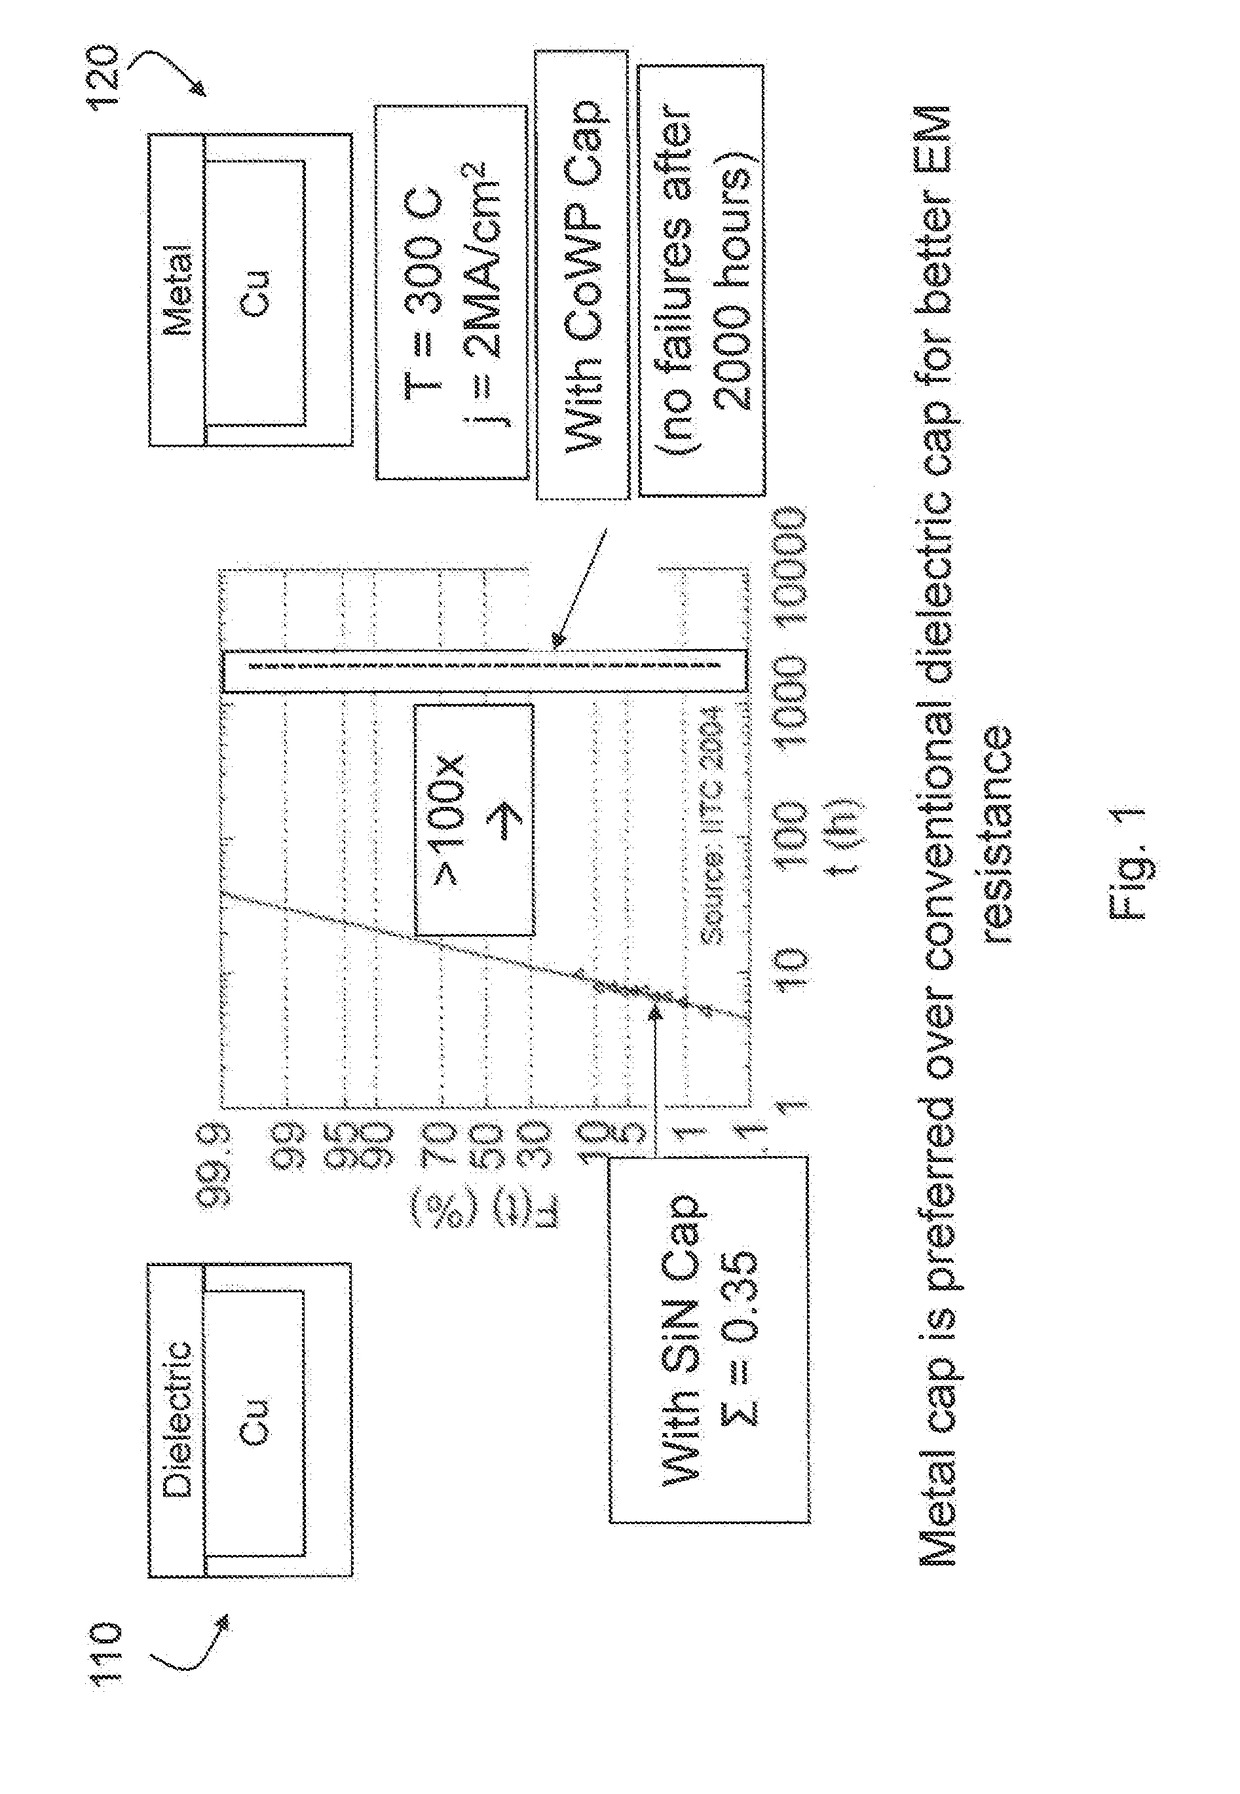 Structure and process for metal cap integration